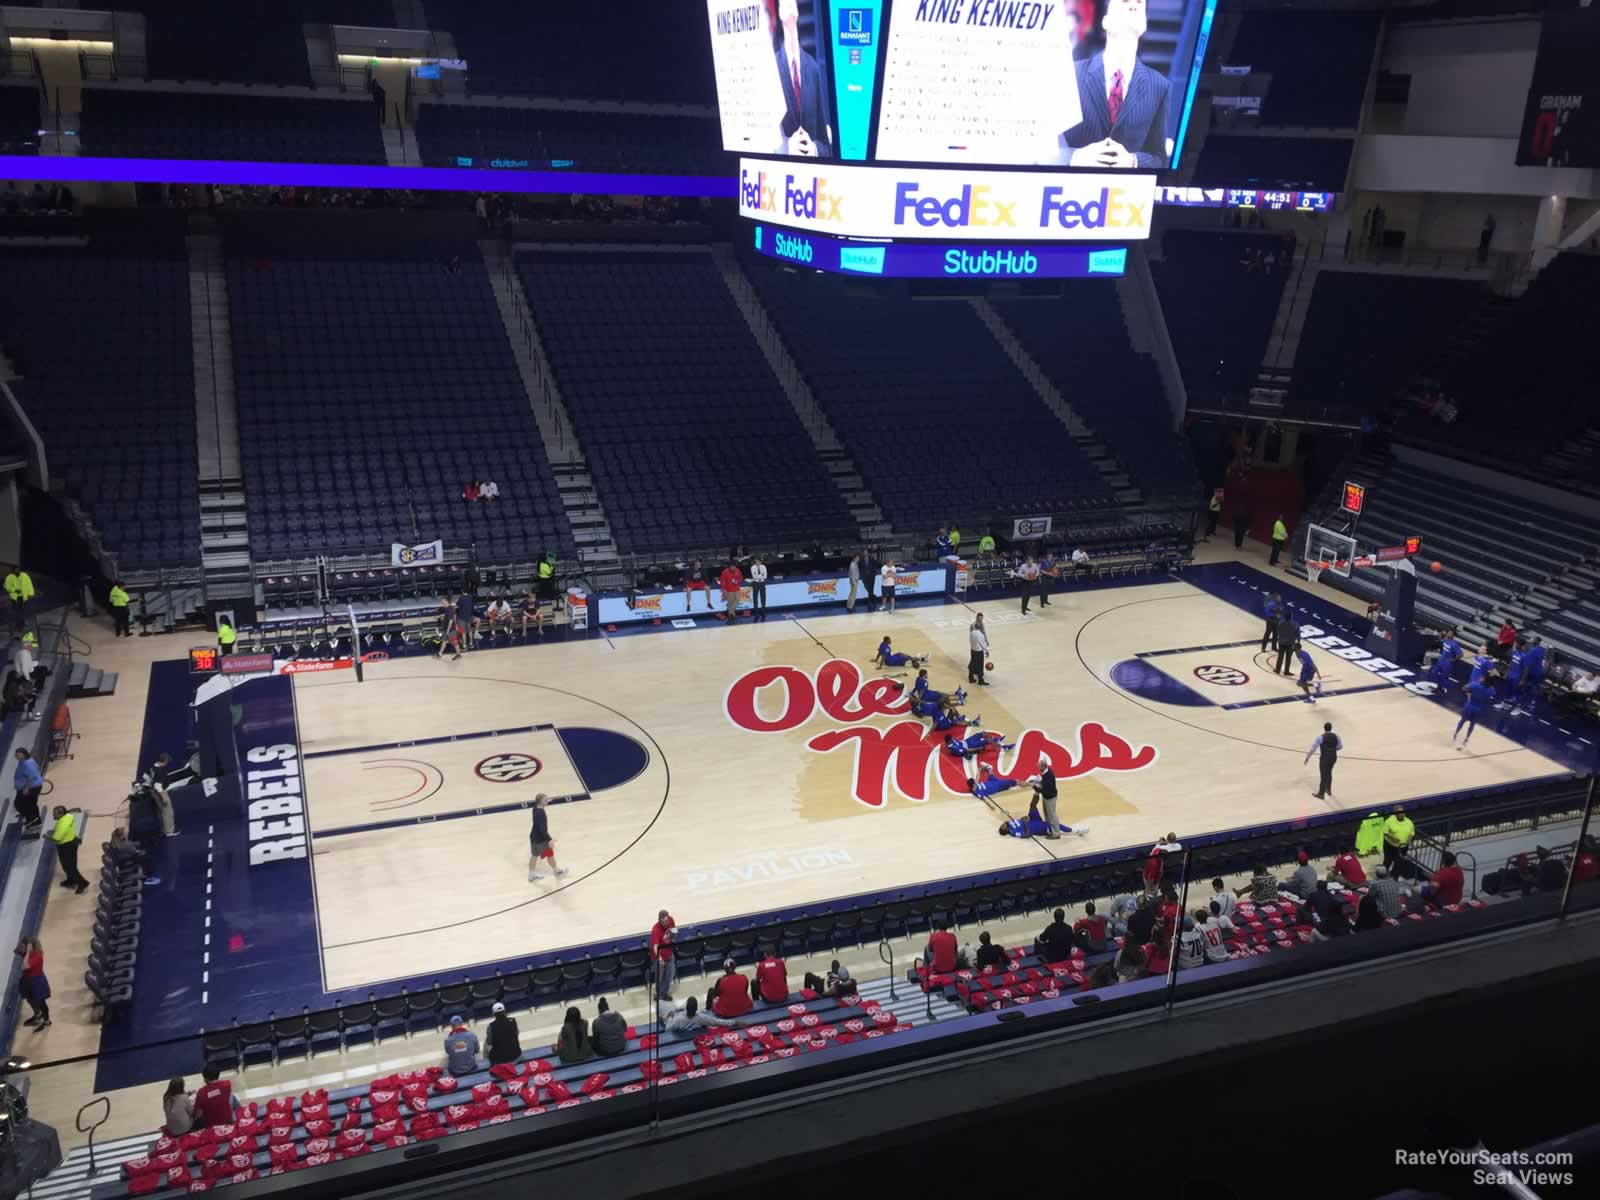 section 205, row 3 seat view  - pavilion at ole miss